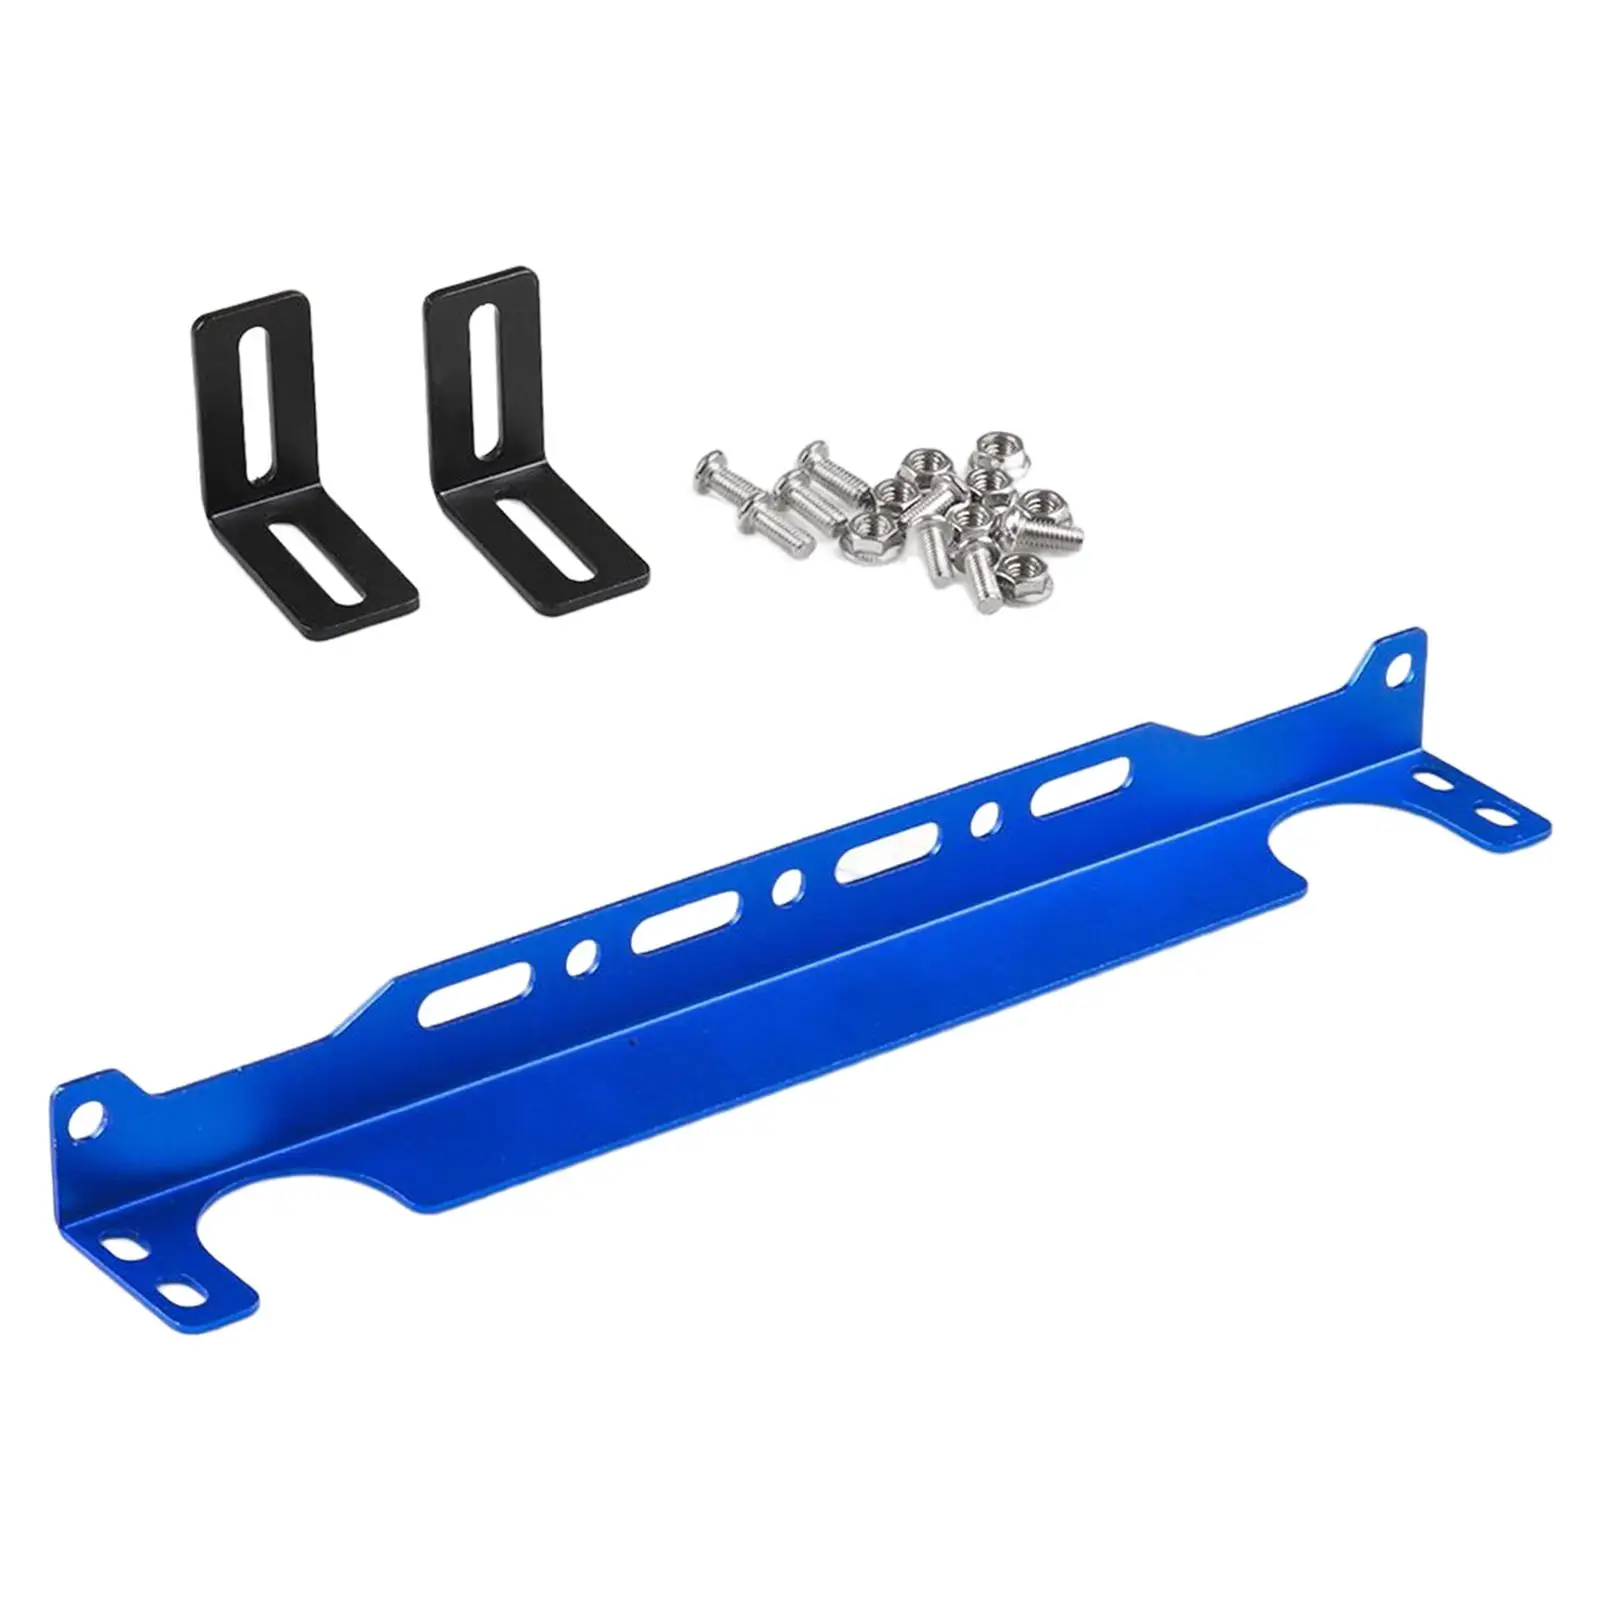 Universal Oil Cooler Mounting Bracket Kit 34cm/13.4in Accessories Professional High Performance High Quality Durable